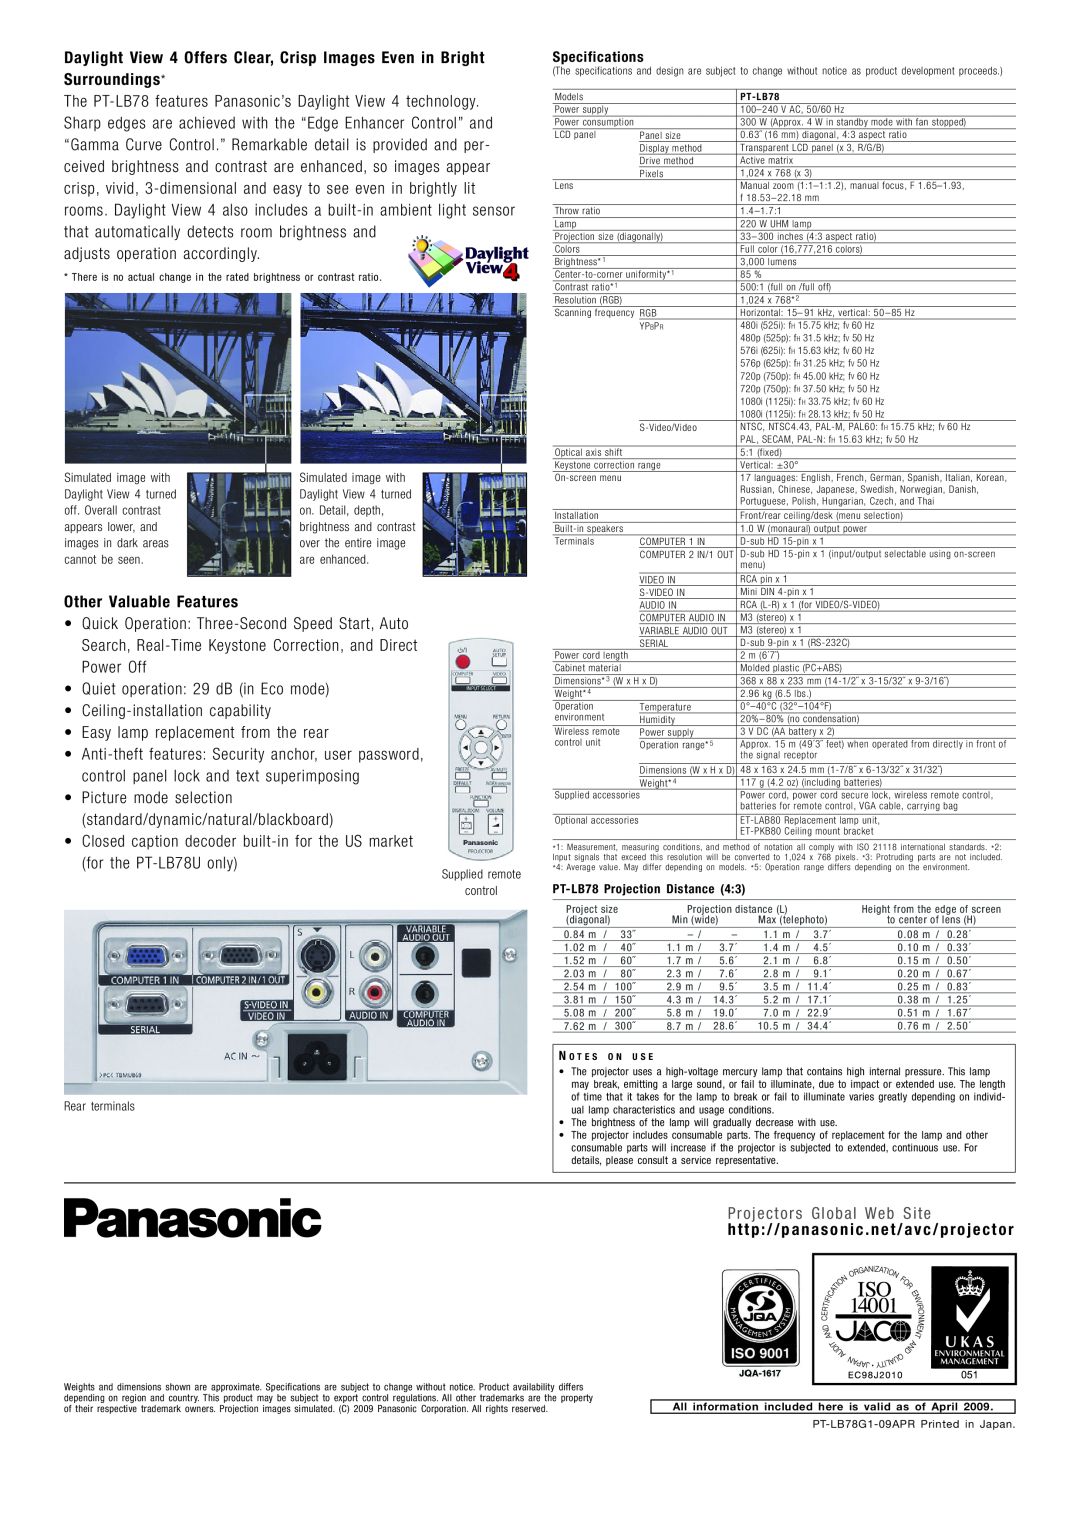 Panasonic PT-LB78 manual adjusts operation accordingly, Other Valuable Features, Easy lamp replacement from the rear 